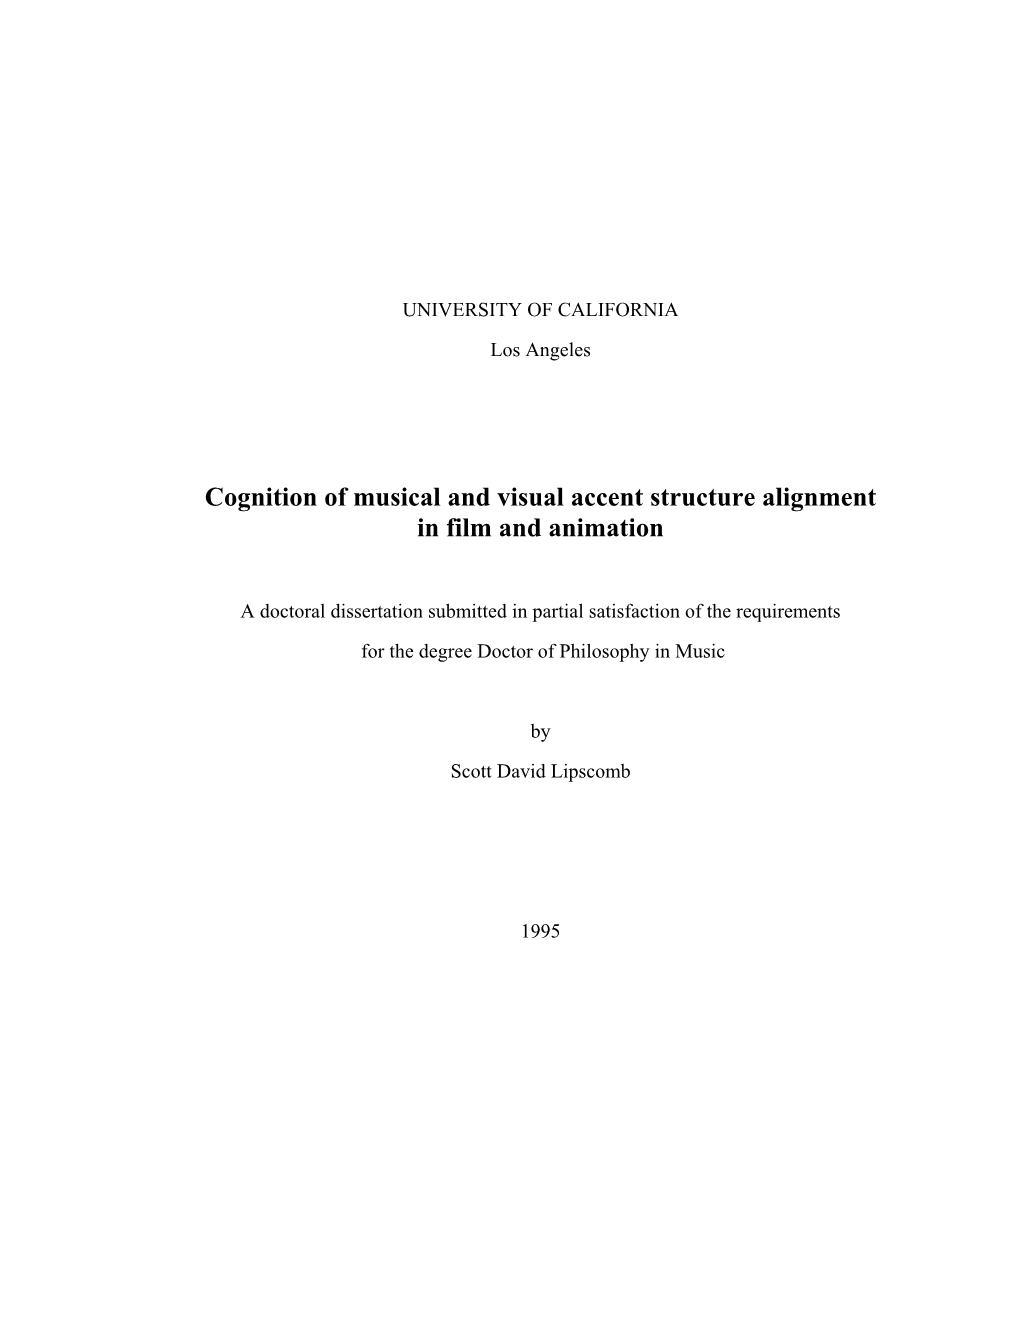 Cognition of Musical and Visual Accent Structure Alignment in Film and Animation